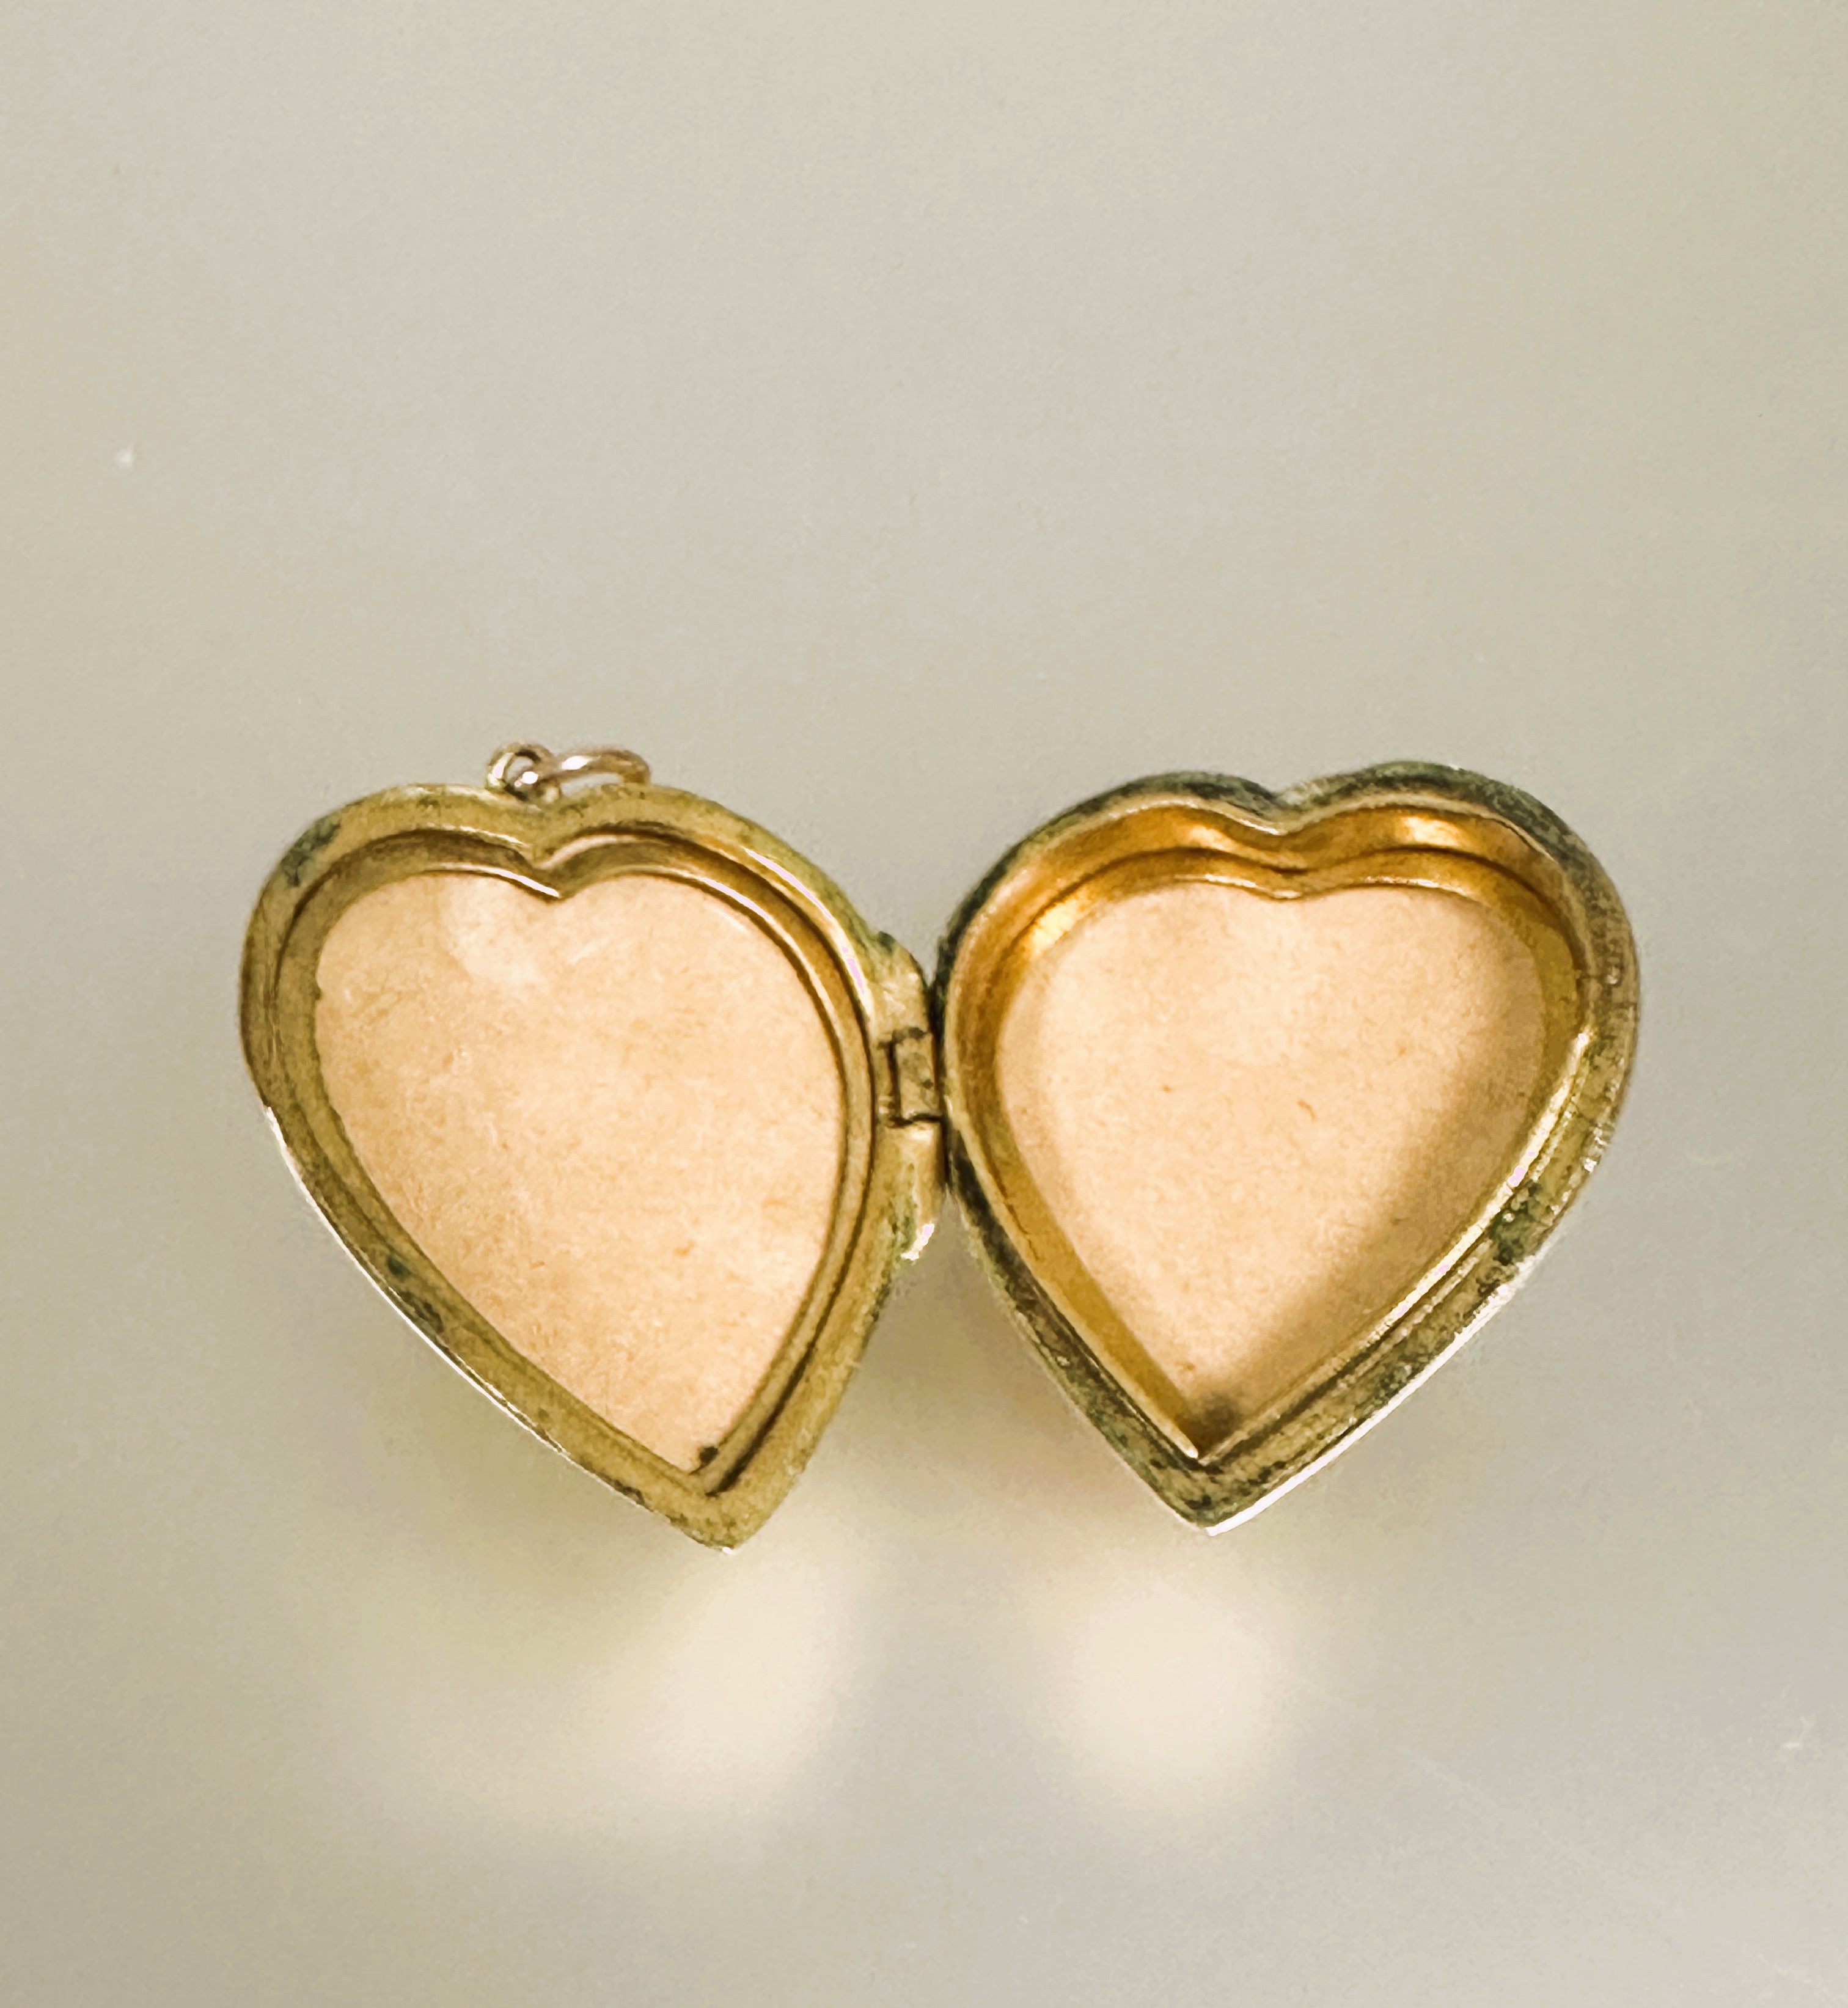 A 9ct gold engraved heart shaped locket H x 2.5cm and a pair of 9ct gold teardrop style earrings L x - Image 5 of 5